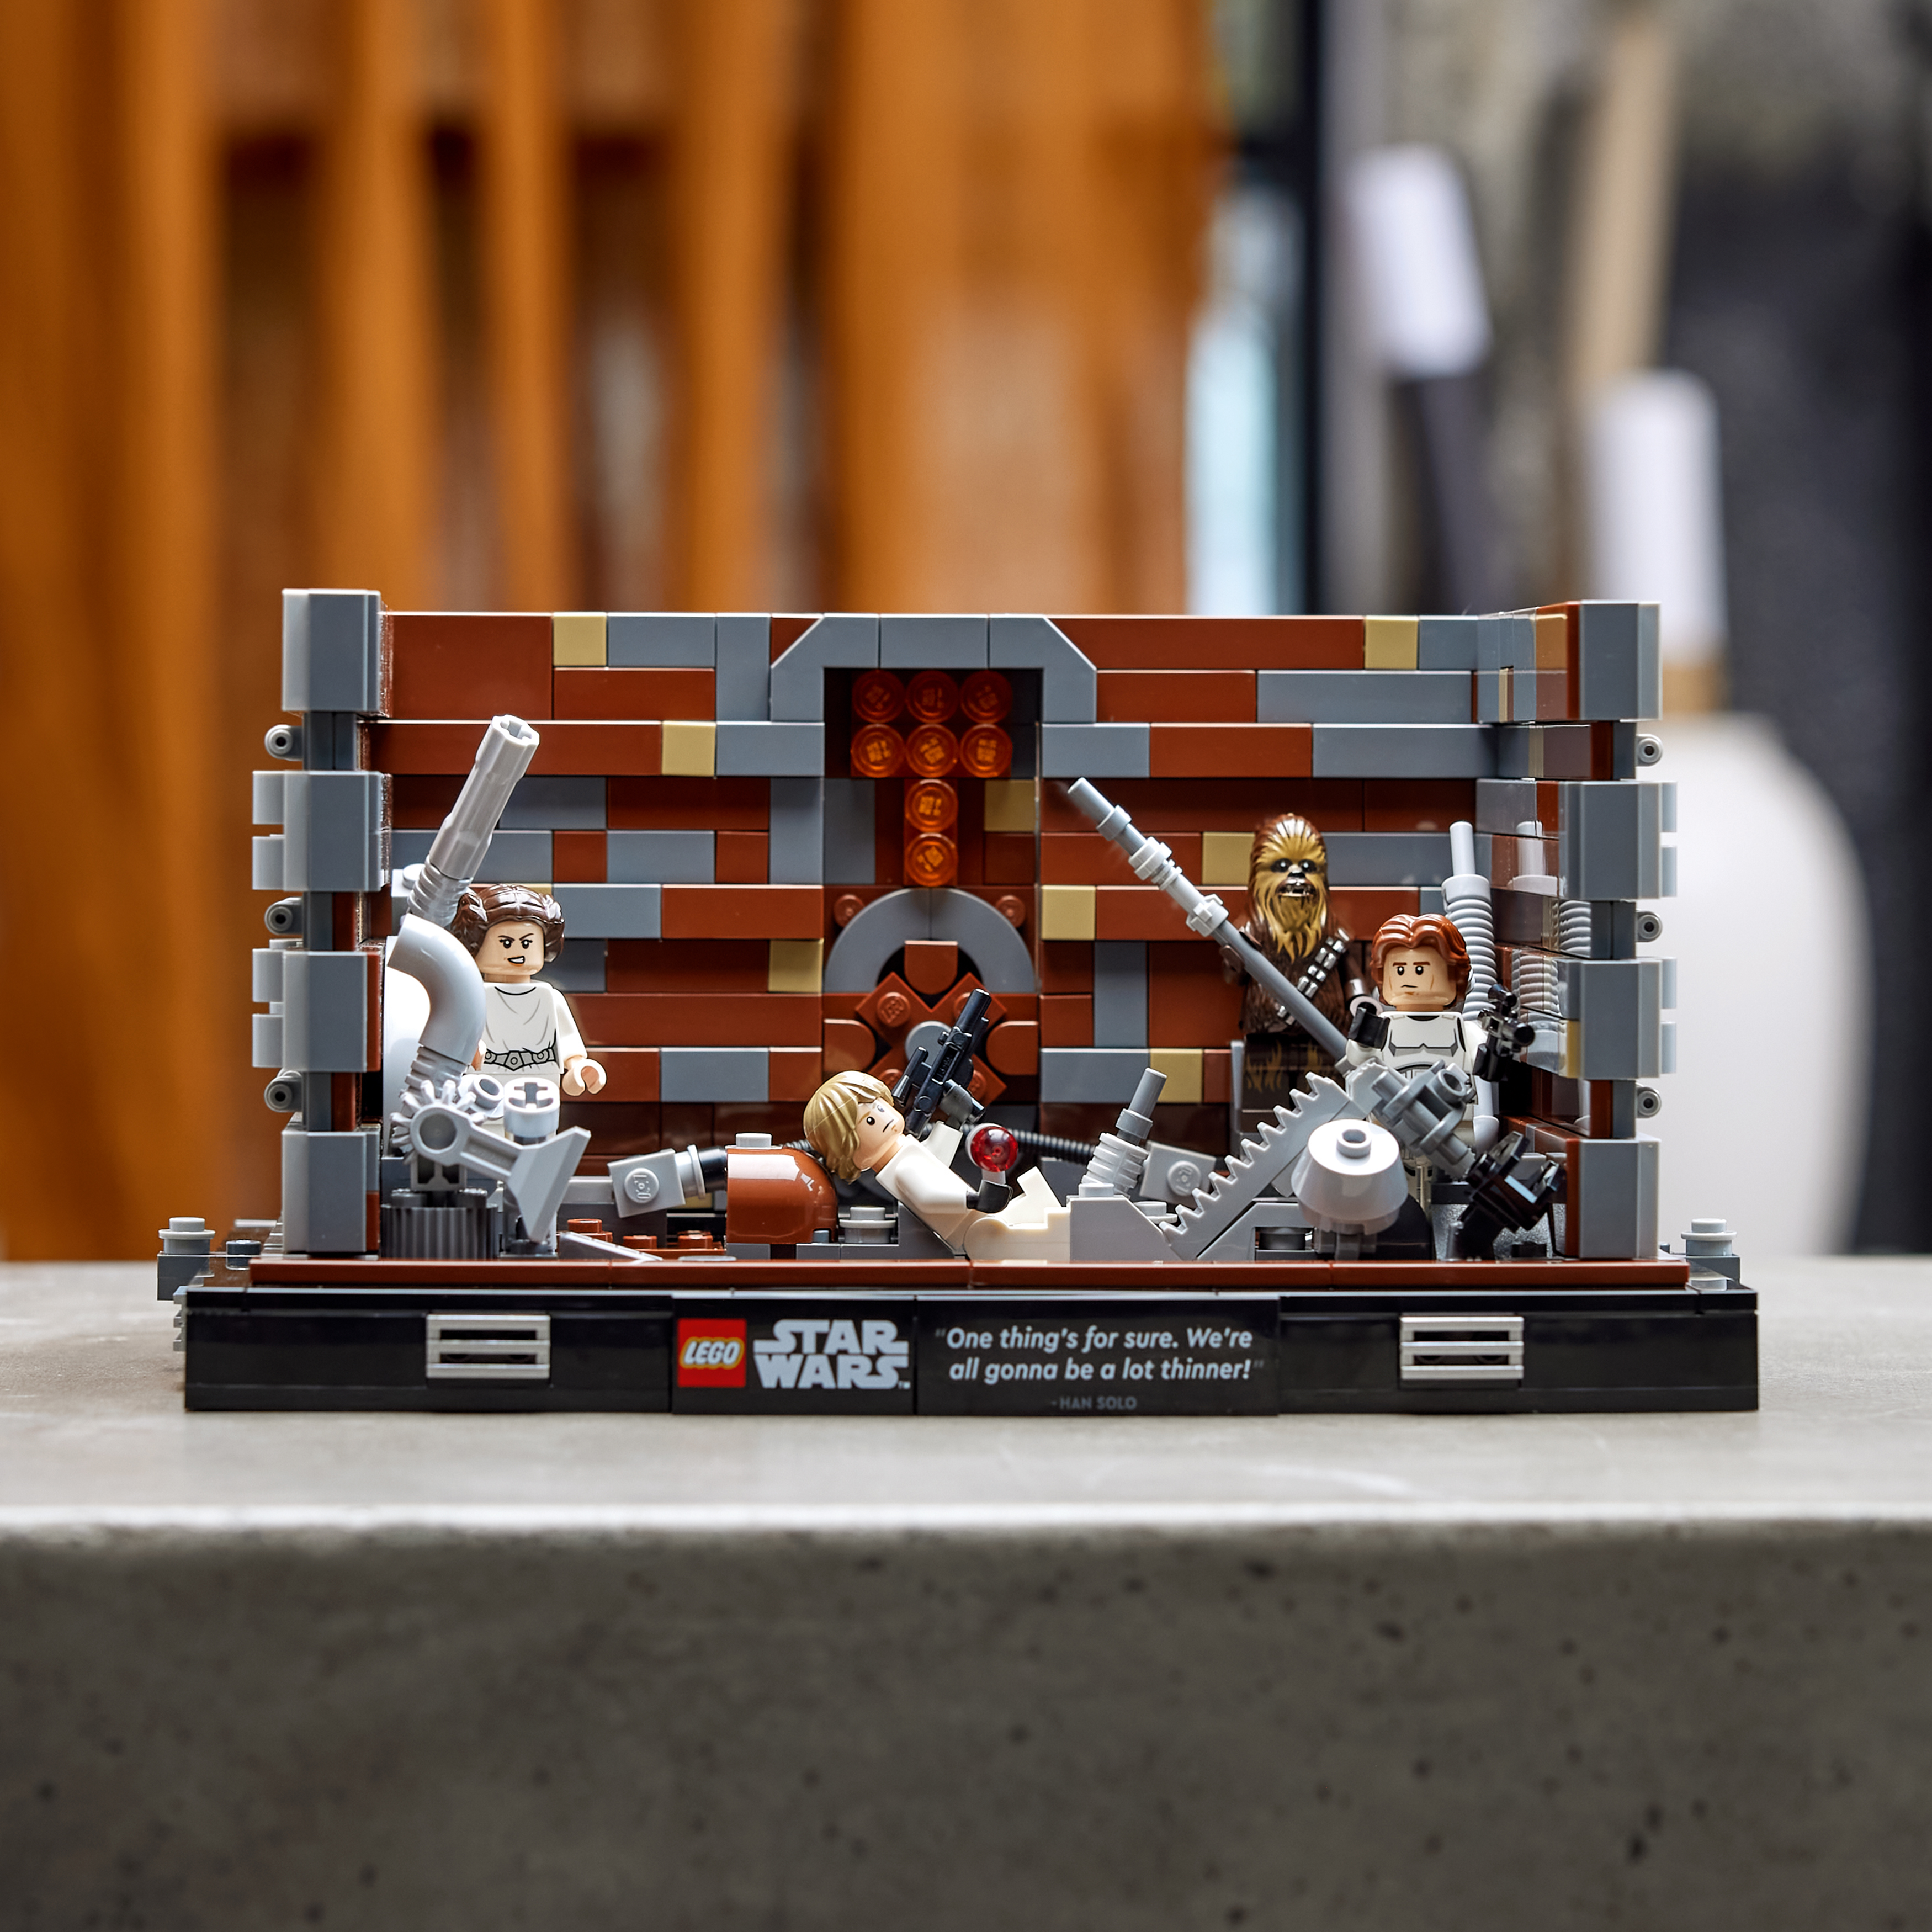 Full lineup of the LEGO Star Wars Diorama collection officially revealed! -  Jay's Brick Blog